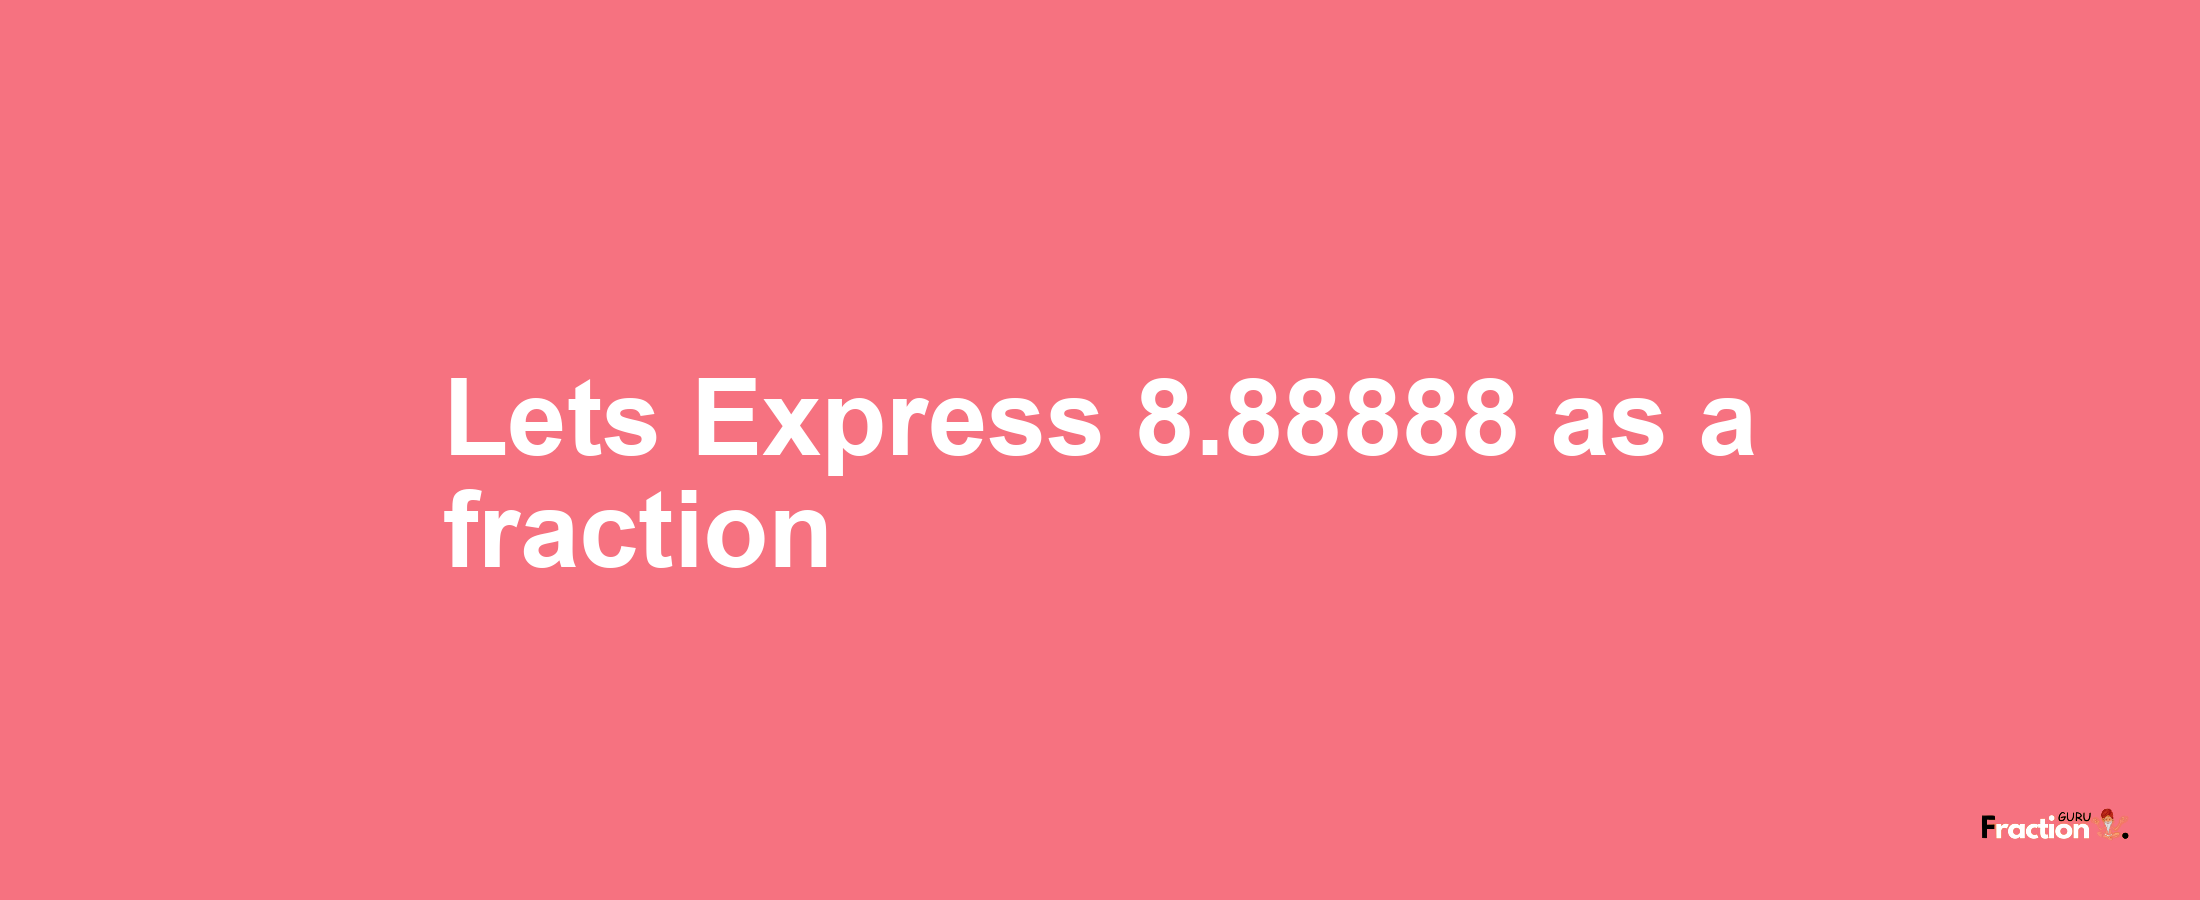 Lets Express 8.88888 as afraction